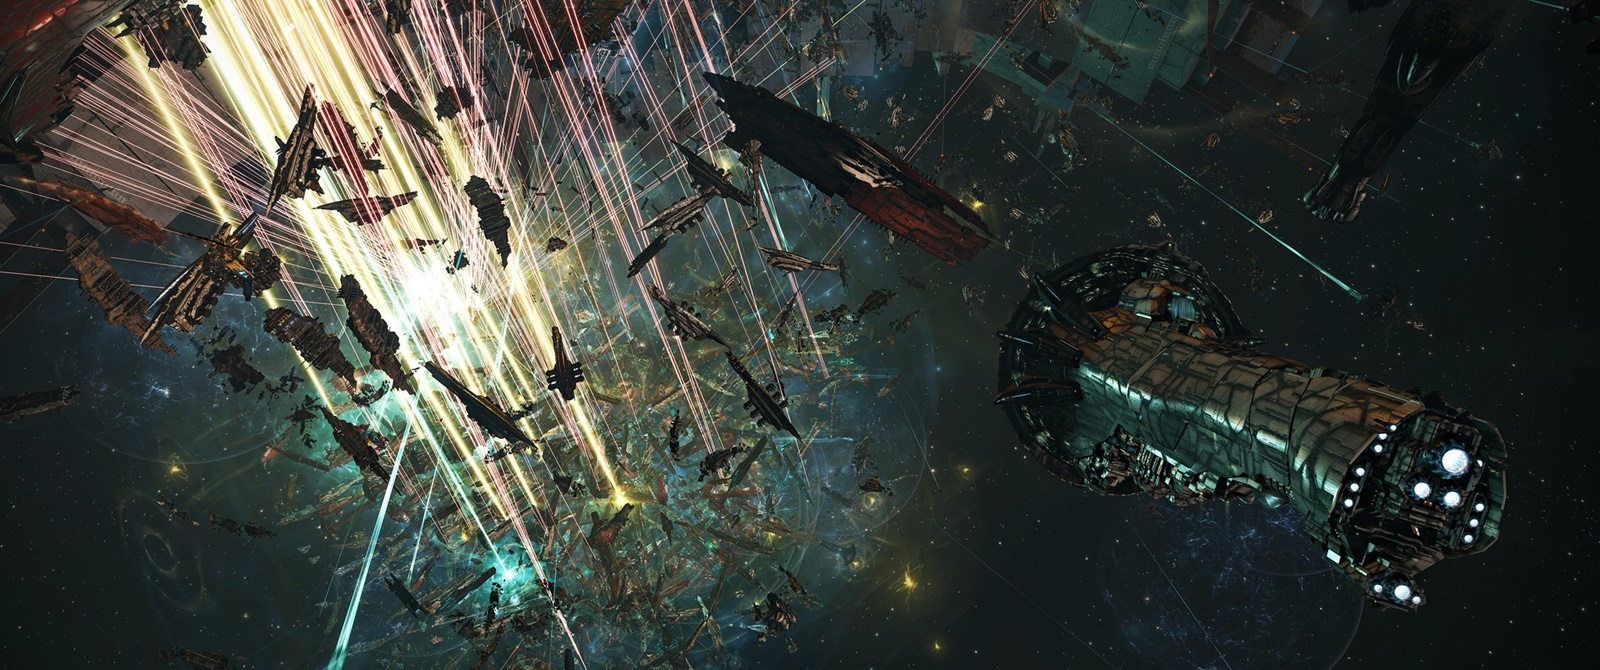 Mmorpg Eve Online 被害総額が過去最高となる大型戦争 M2 Xfeの殺戮 が勃発 Game Watch